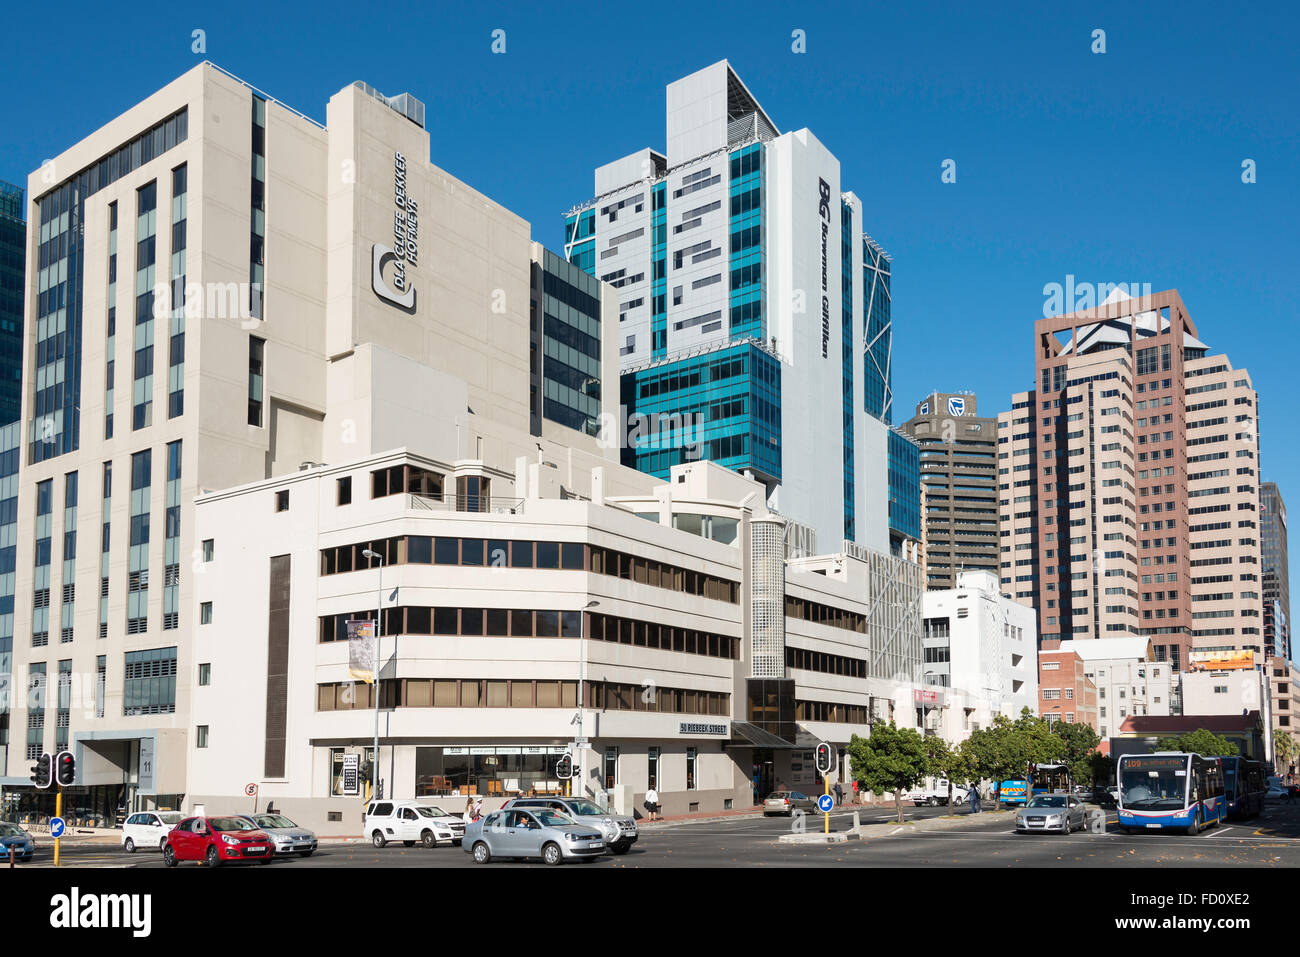 Office buildings in CBD, Riebeek Street, Cape Town, City of Cape Town Municipality, Western Cape Province, South Africa Stock Photo